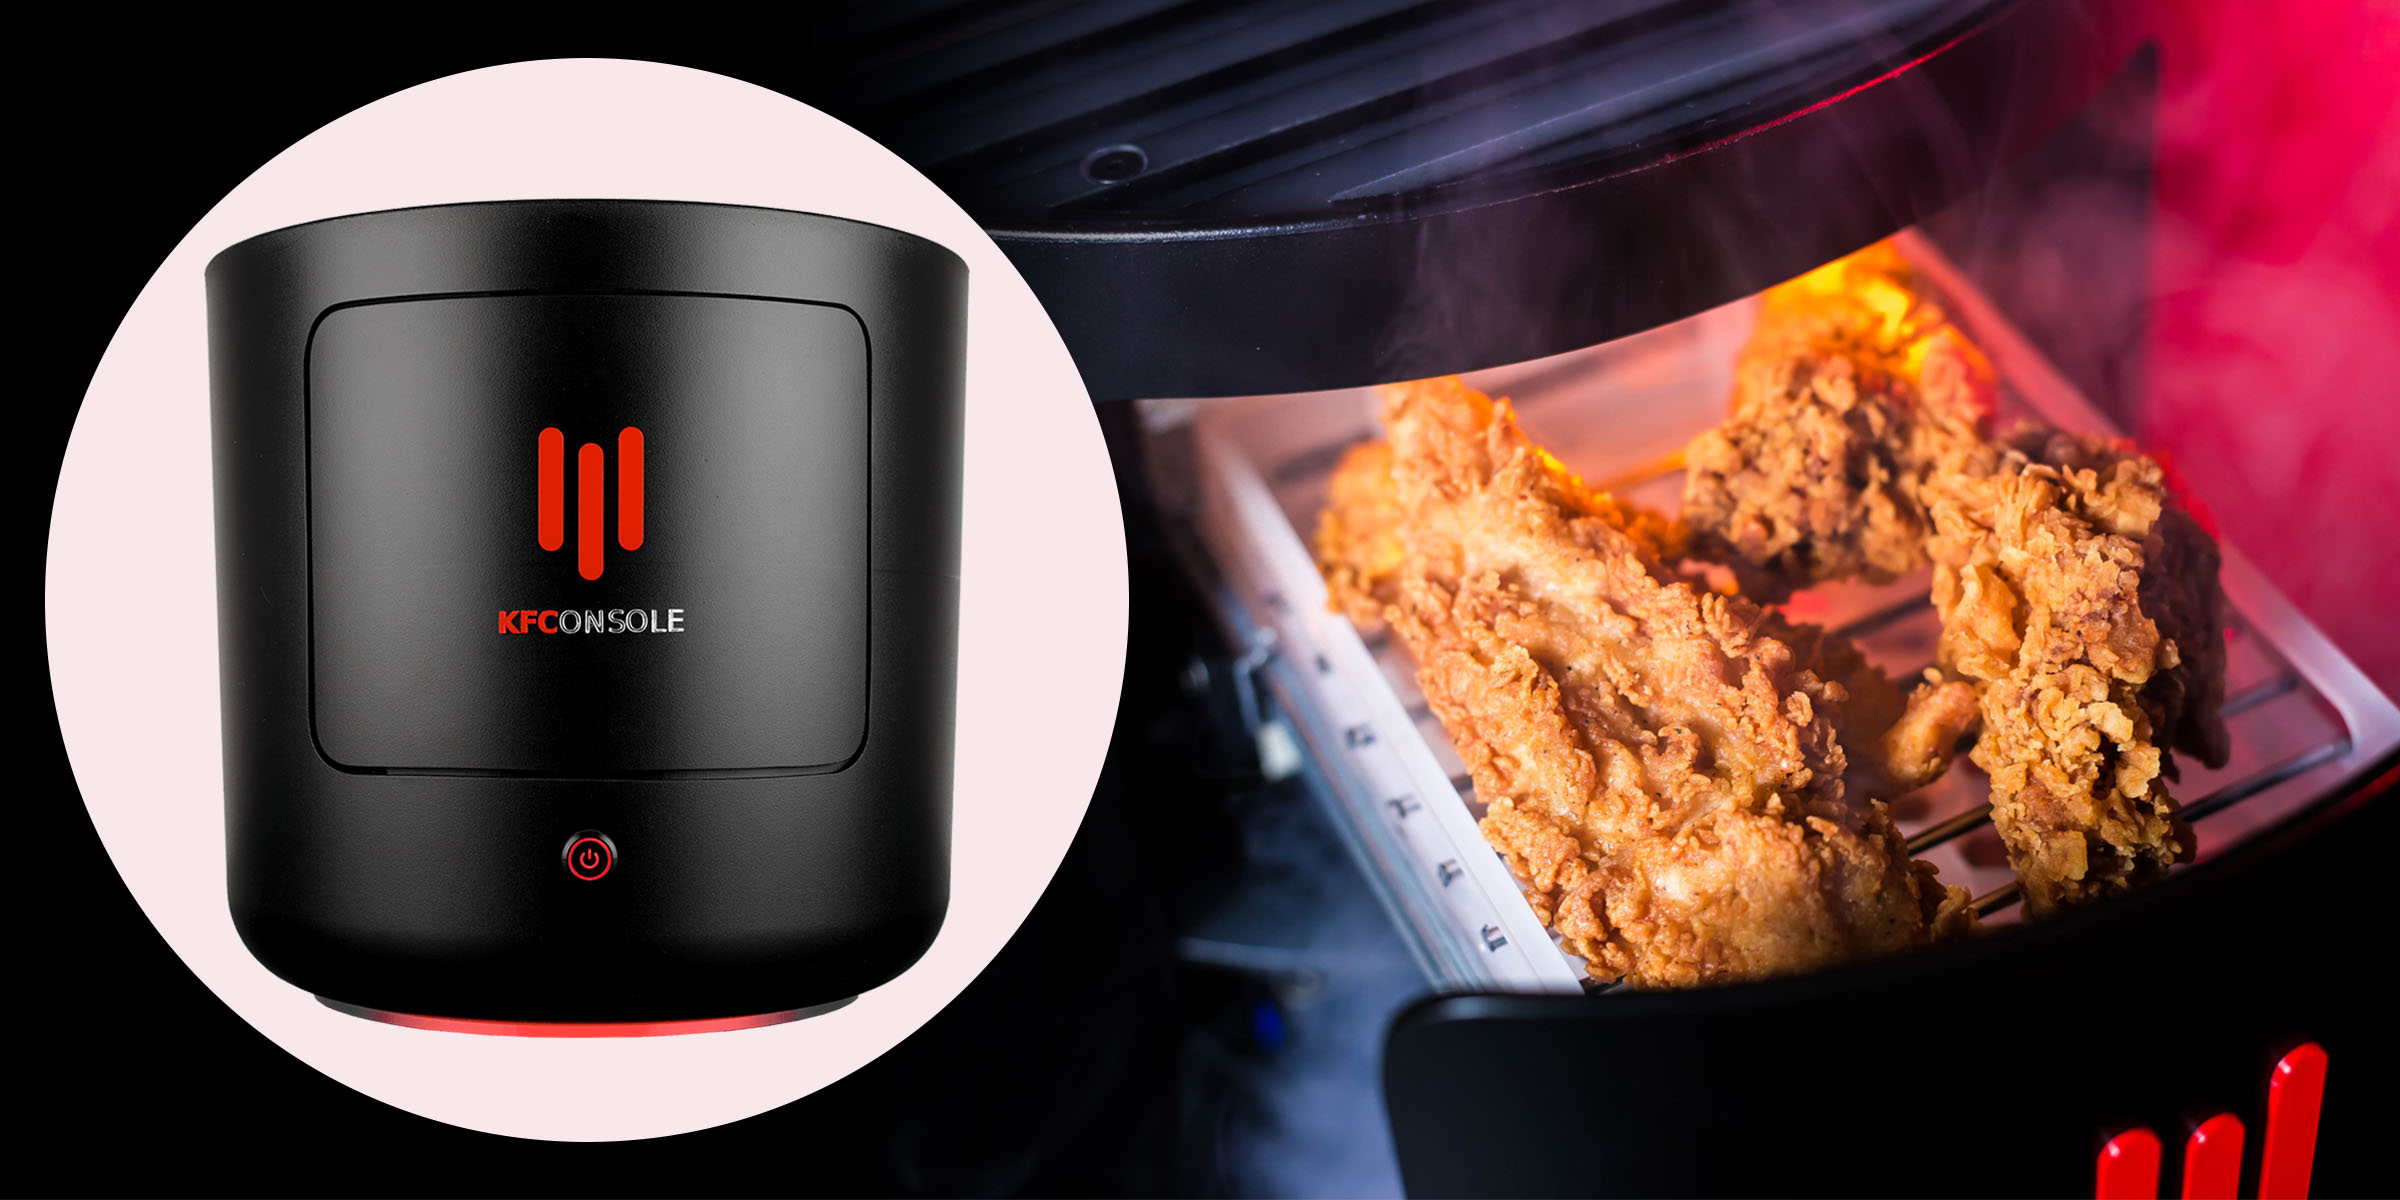 KFC Launches a Gaming Console with Built-in Chicken Warmer